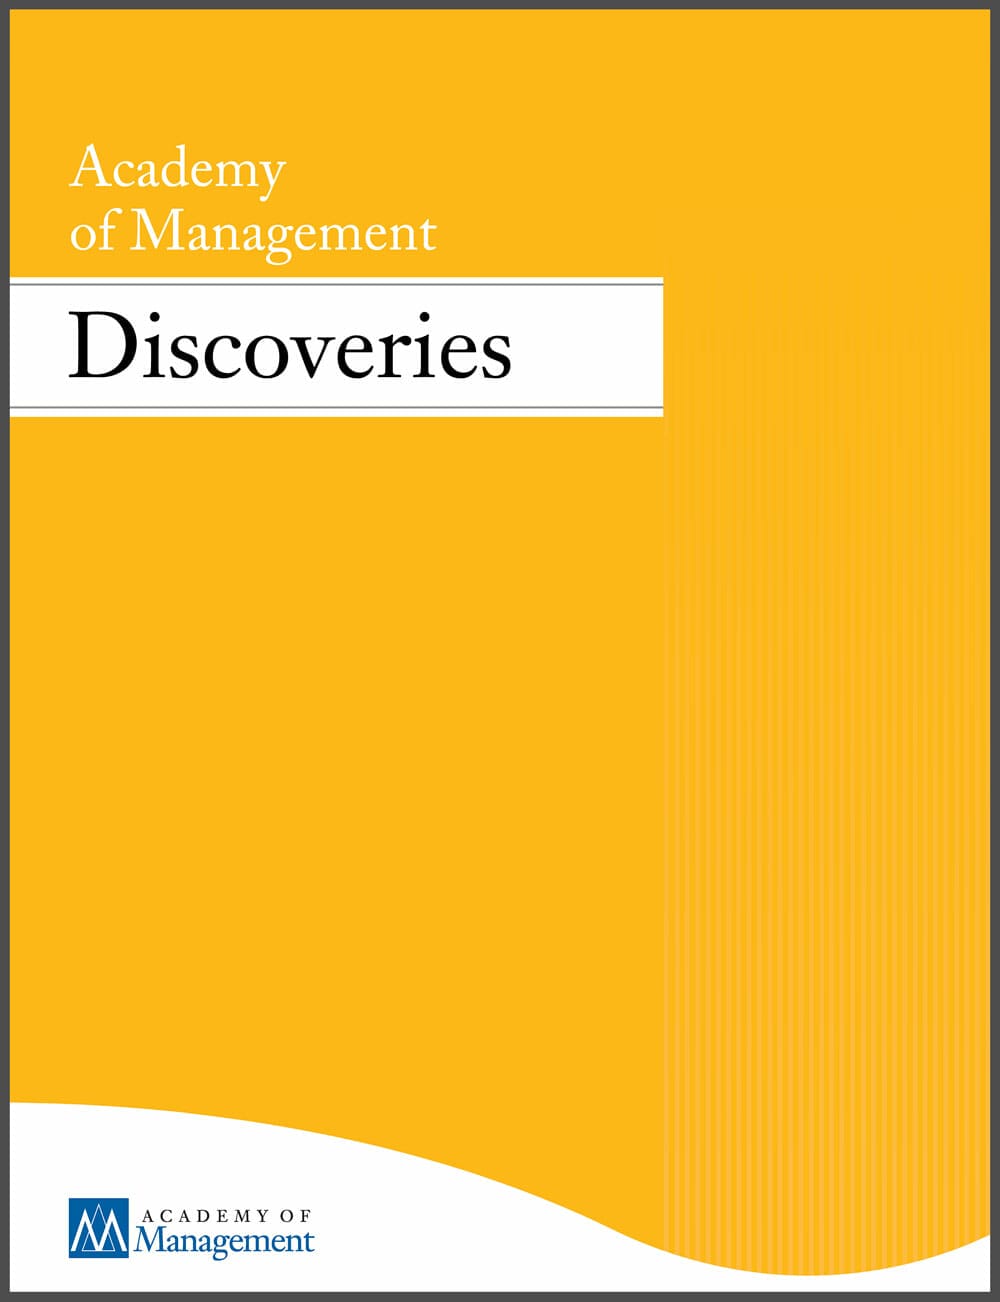 Academy of Management Discoveries Cover 2022